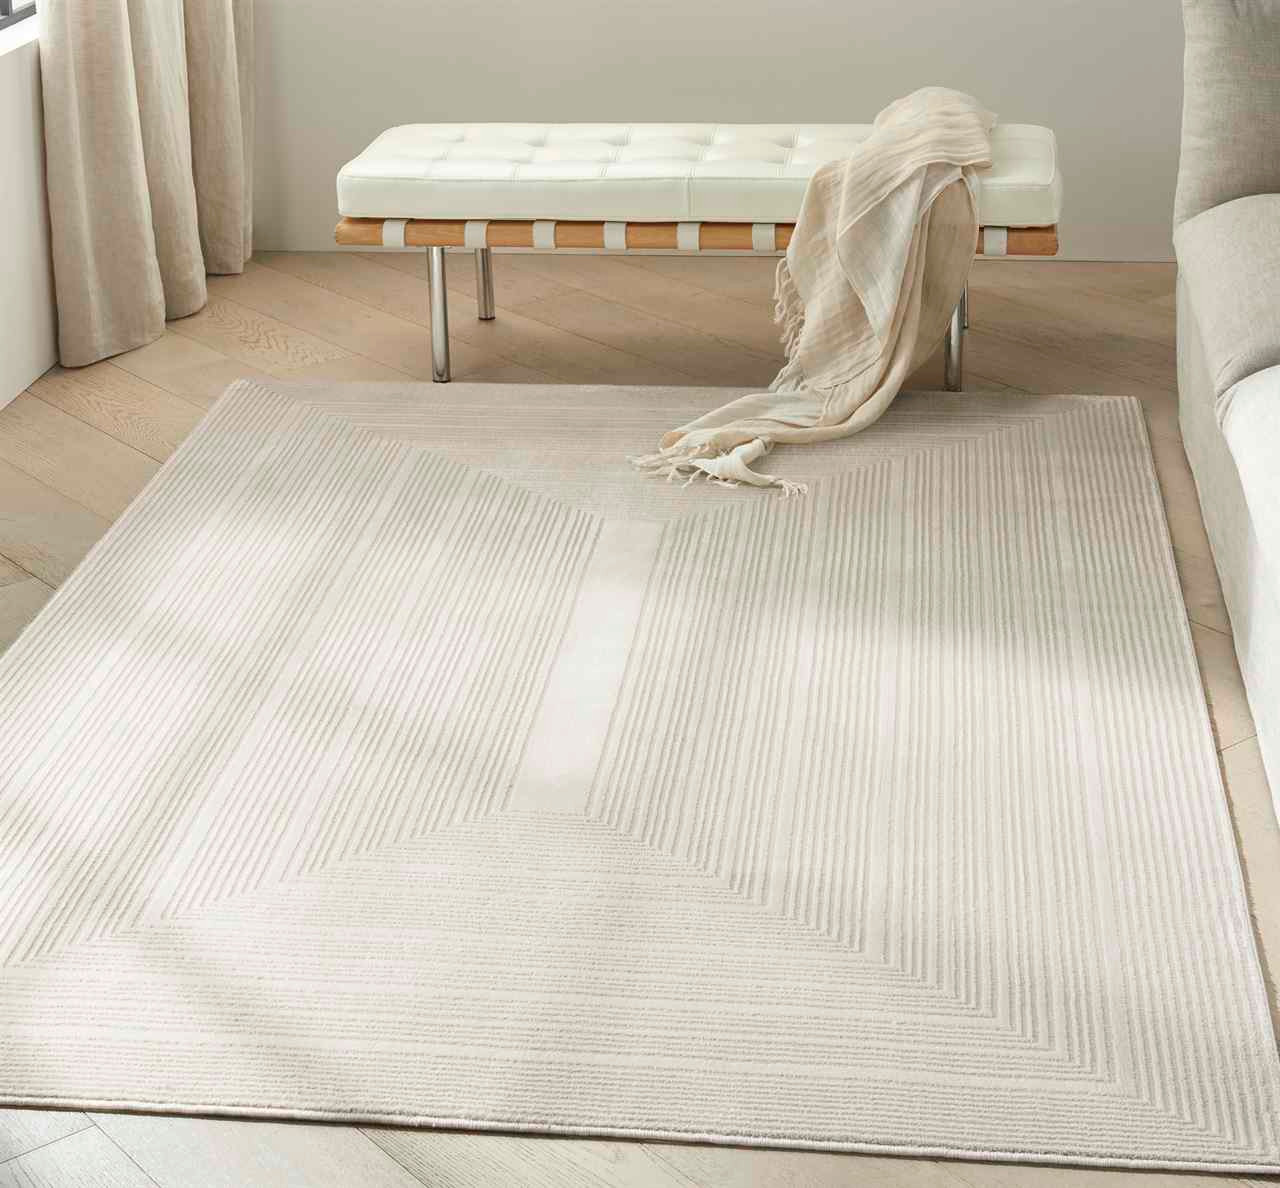 41ELIZABETH 47759-C Orchid 40 x 24 inch Cream/White Rugs, Wool, Viscose, and Cotton